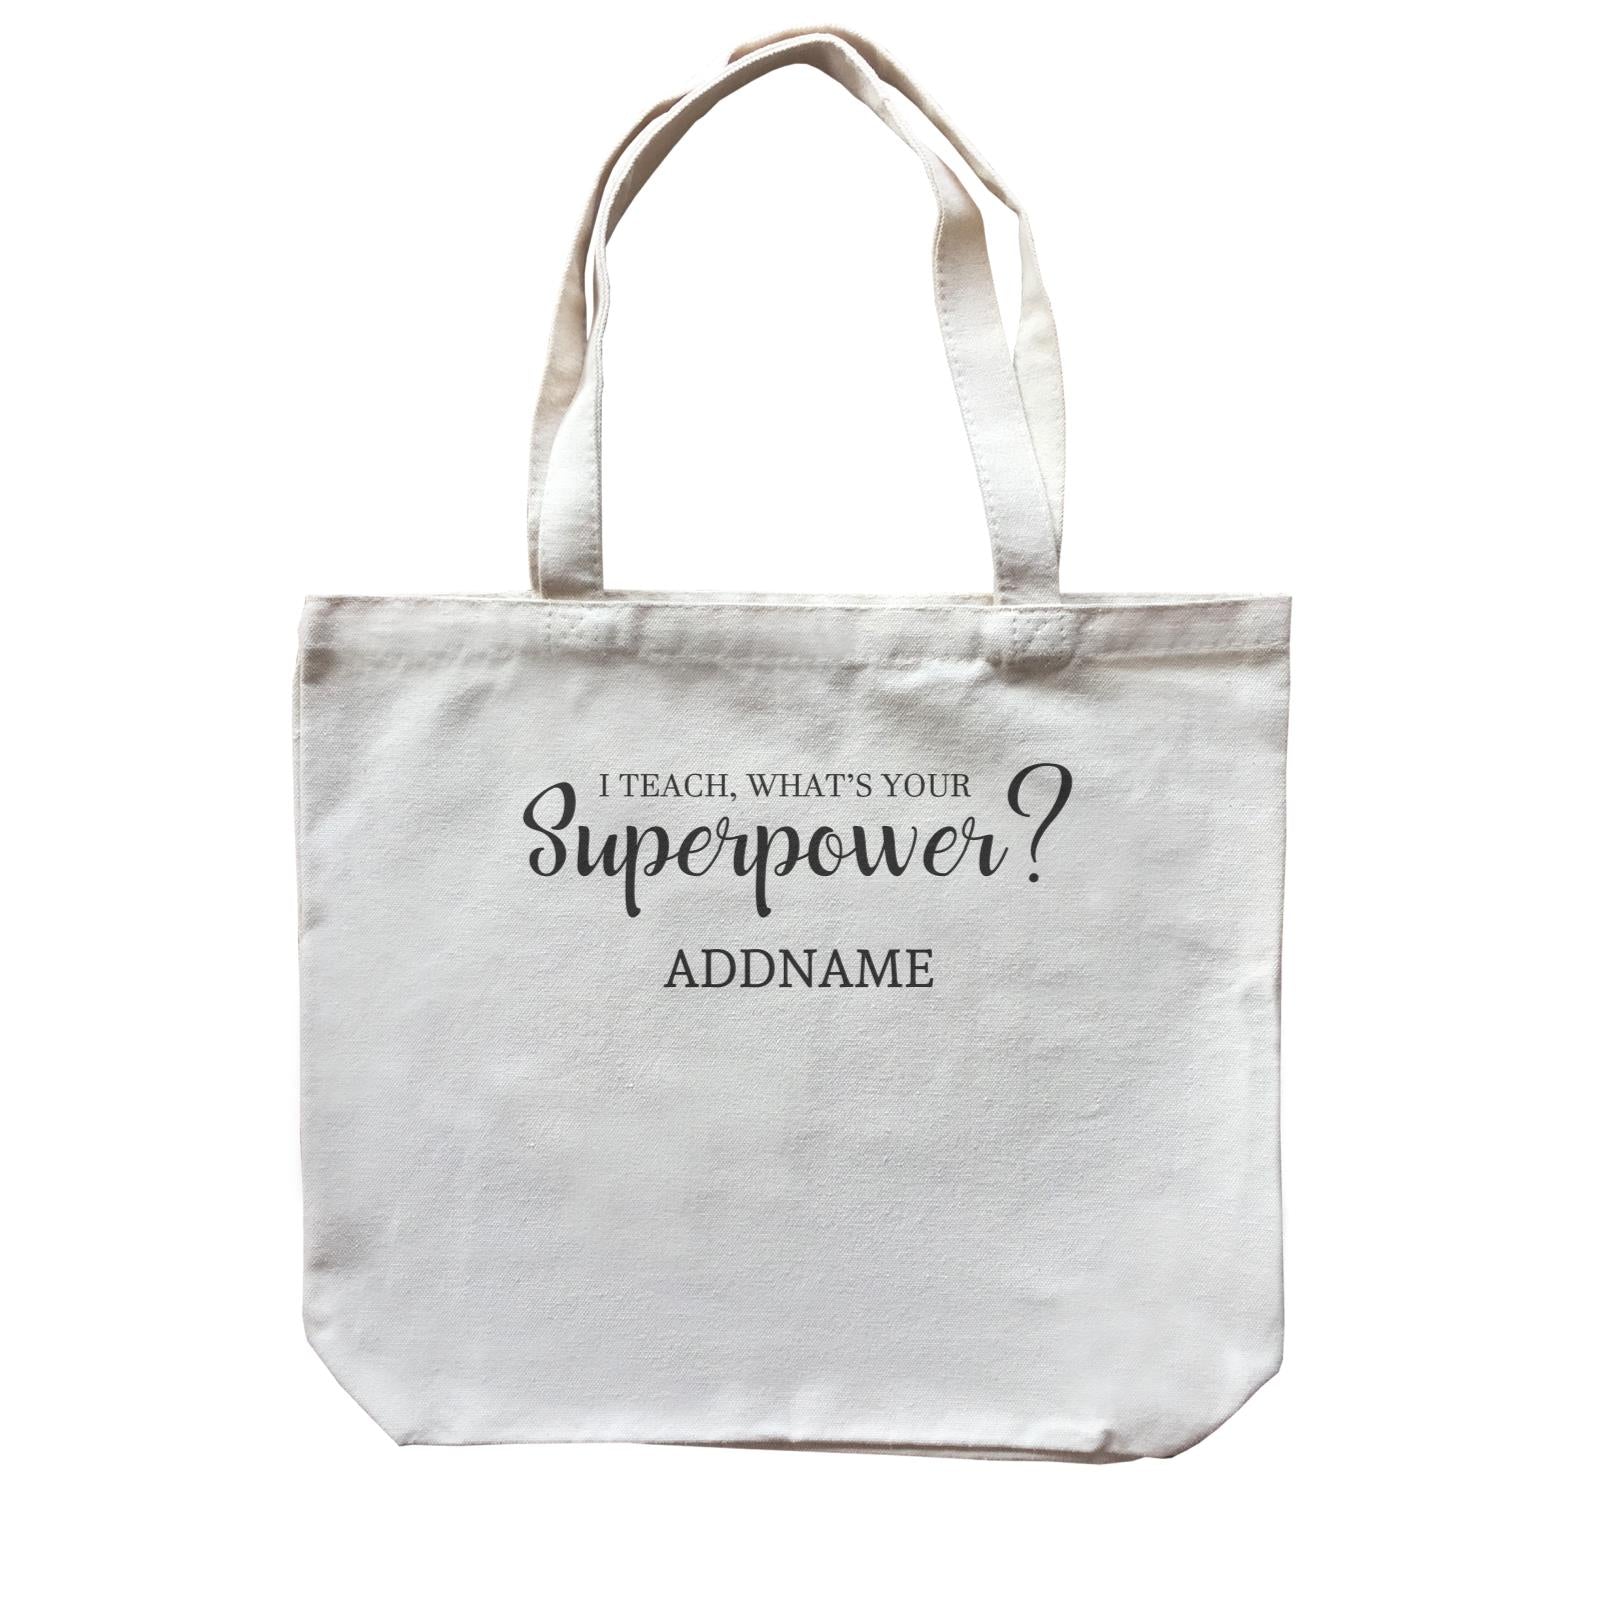 Super Teachers I Teach What's Your Superpower Addname Canvas Bag